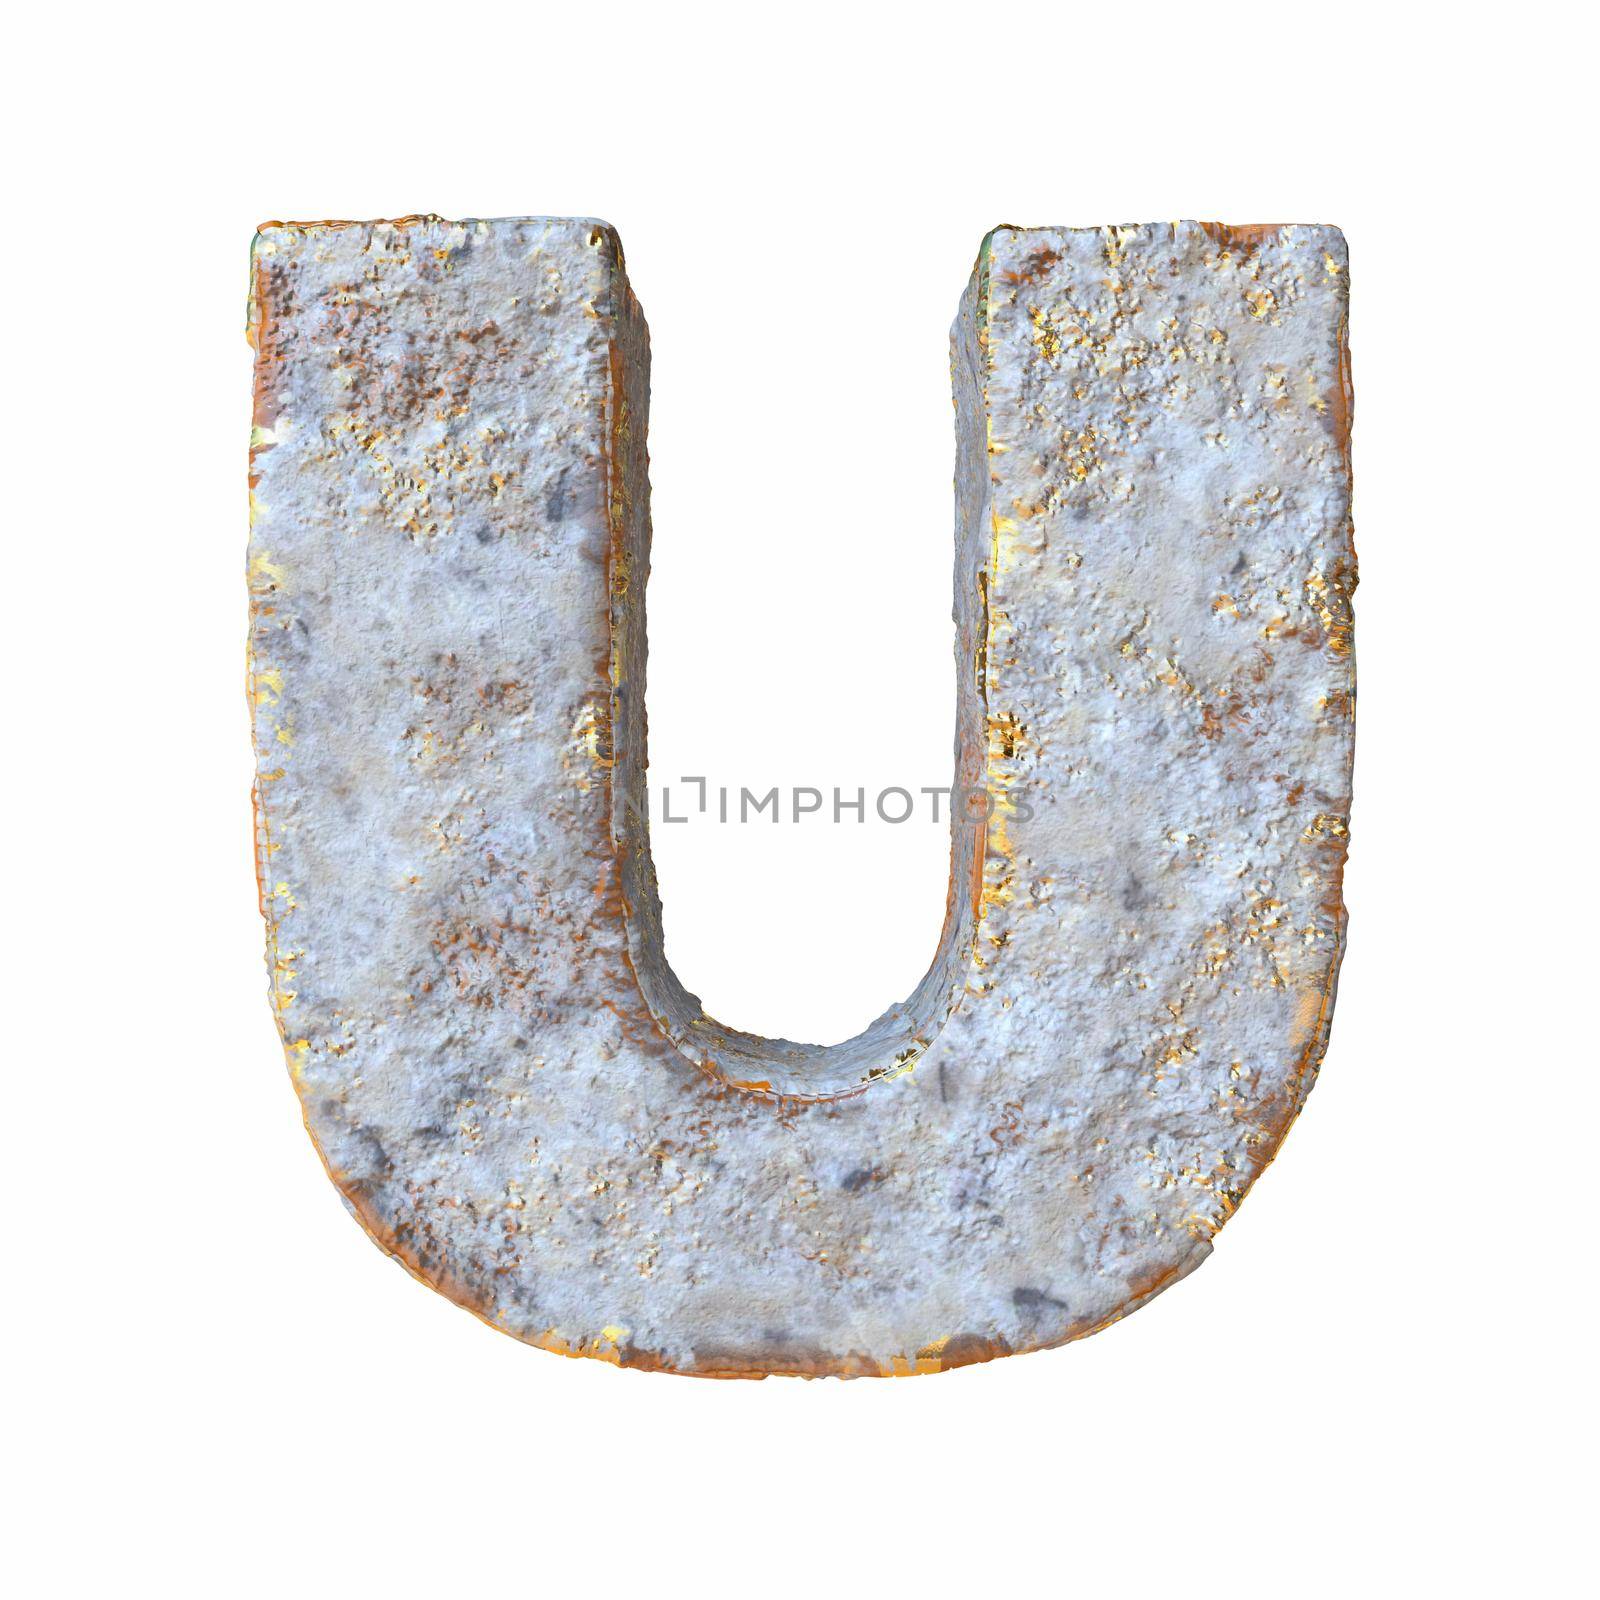 Stone with golden metal particles Letter U 3D by djmilic